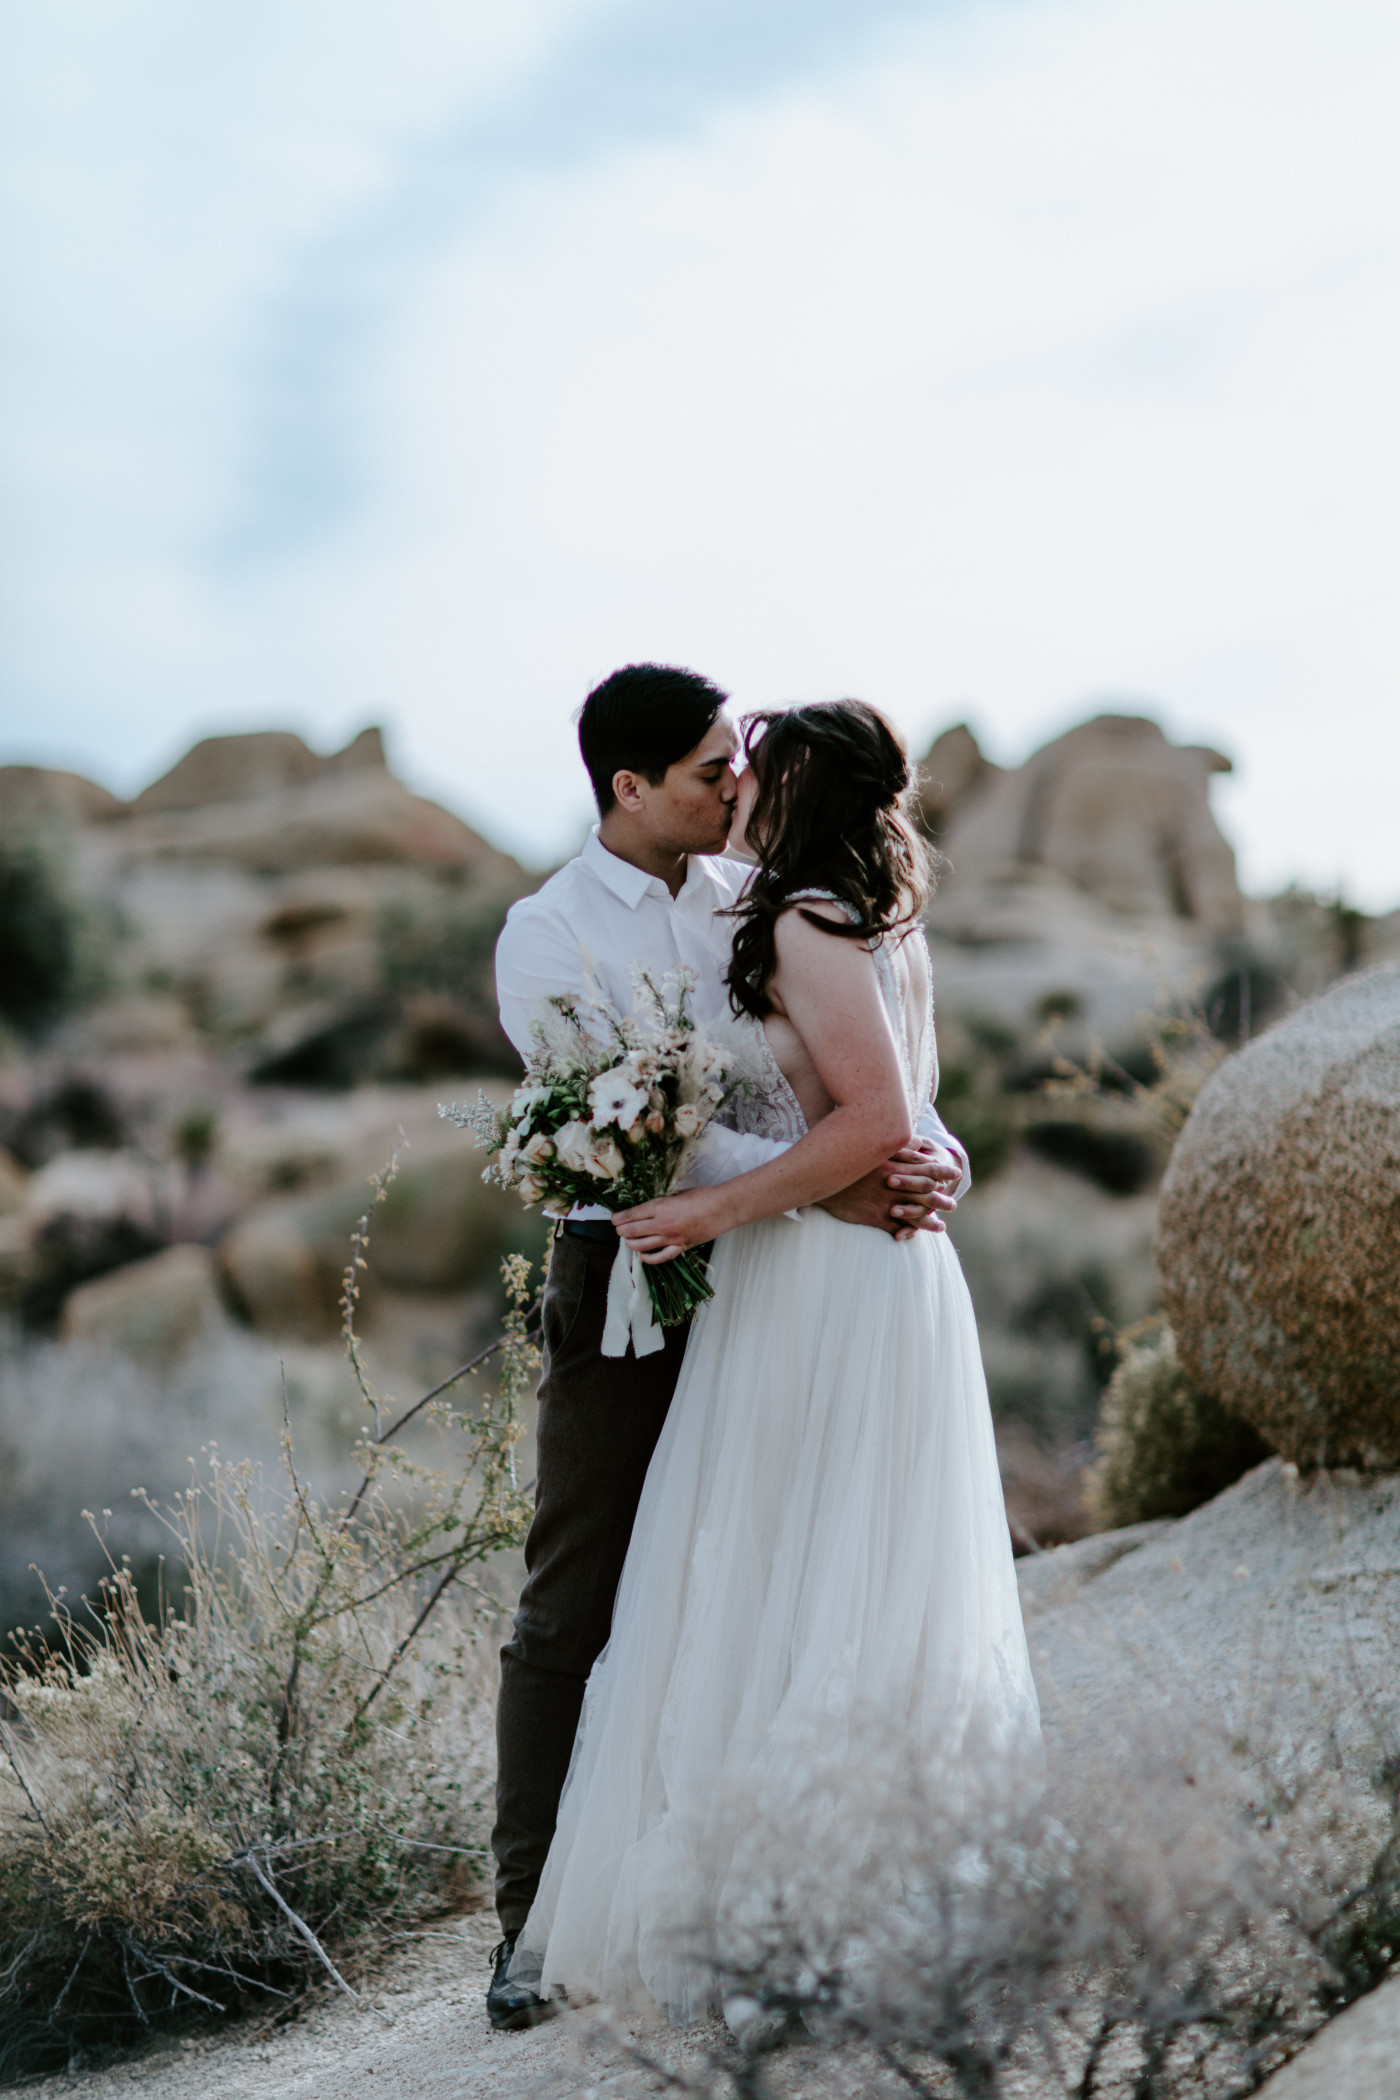 Shelby and Zack go in for a kiss in Joshua Tree National Park.